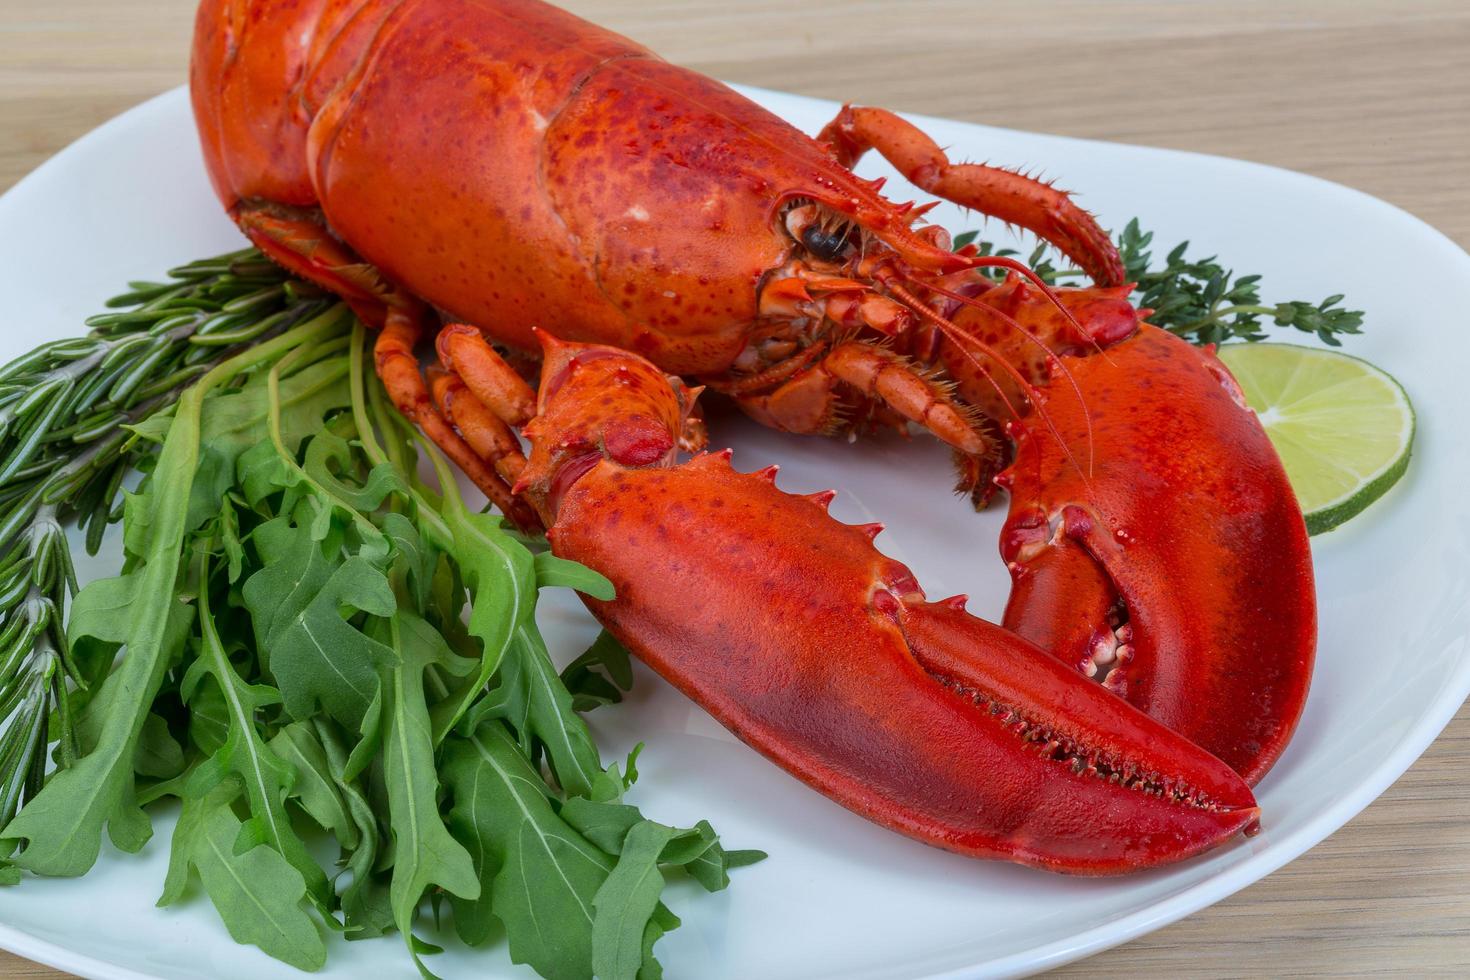 Boiled lobster meal photo